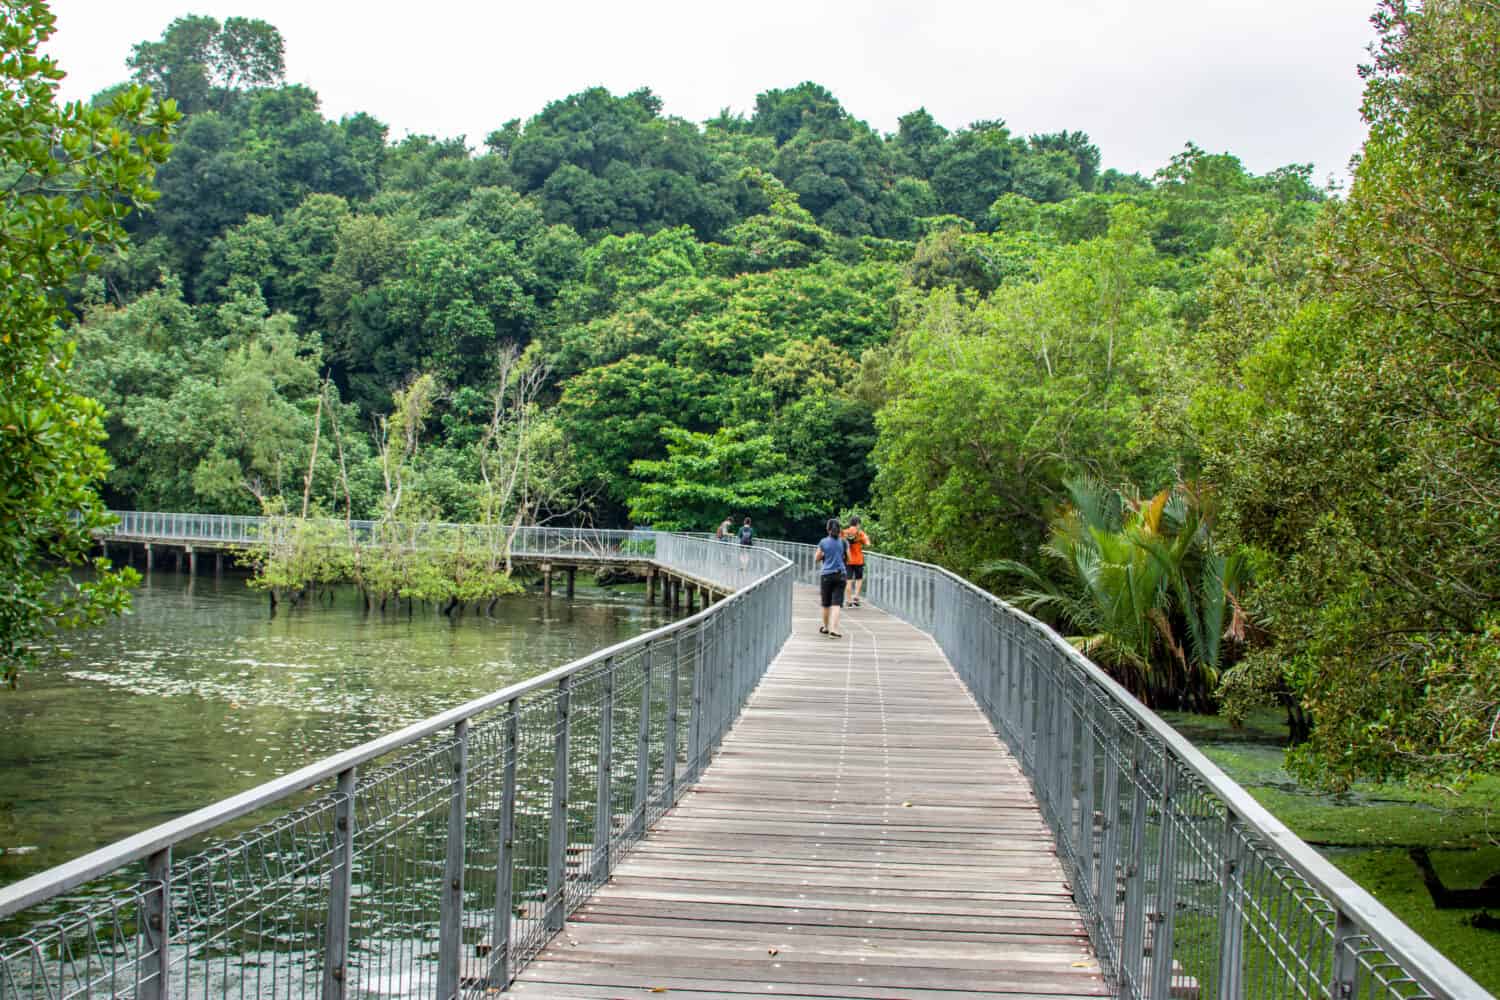 the  boardwalk, rock beach and red mangrove in Chek Jawa wetland.It is a cape and the name of its 100-hectare wetlands located on the south-eastern tip of Pulau Ubin island Singapore. 